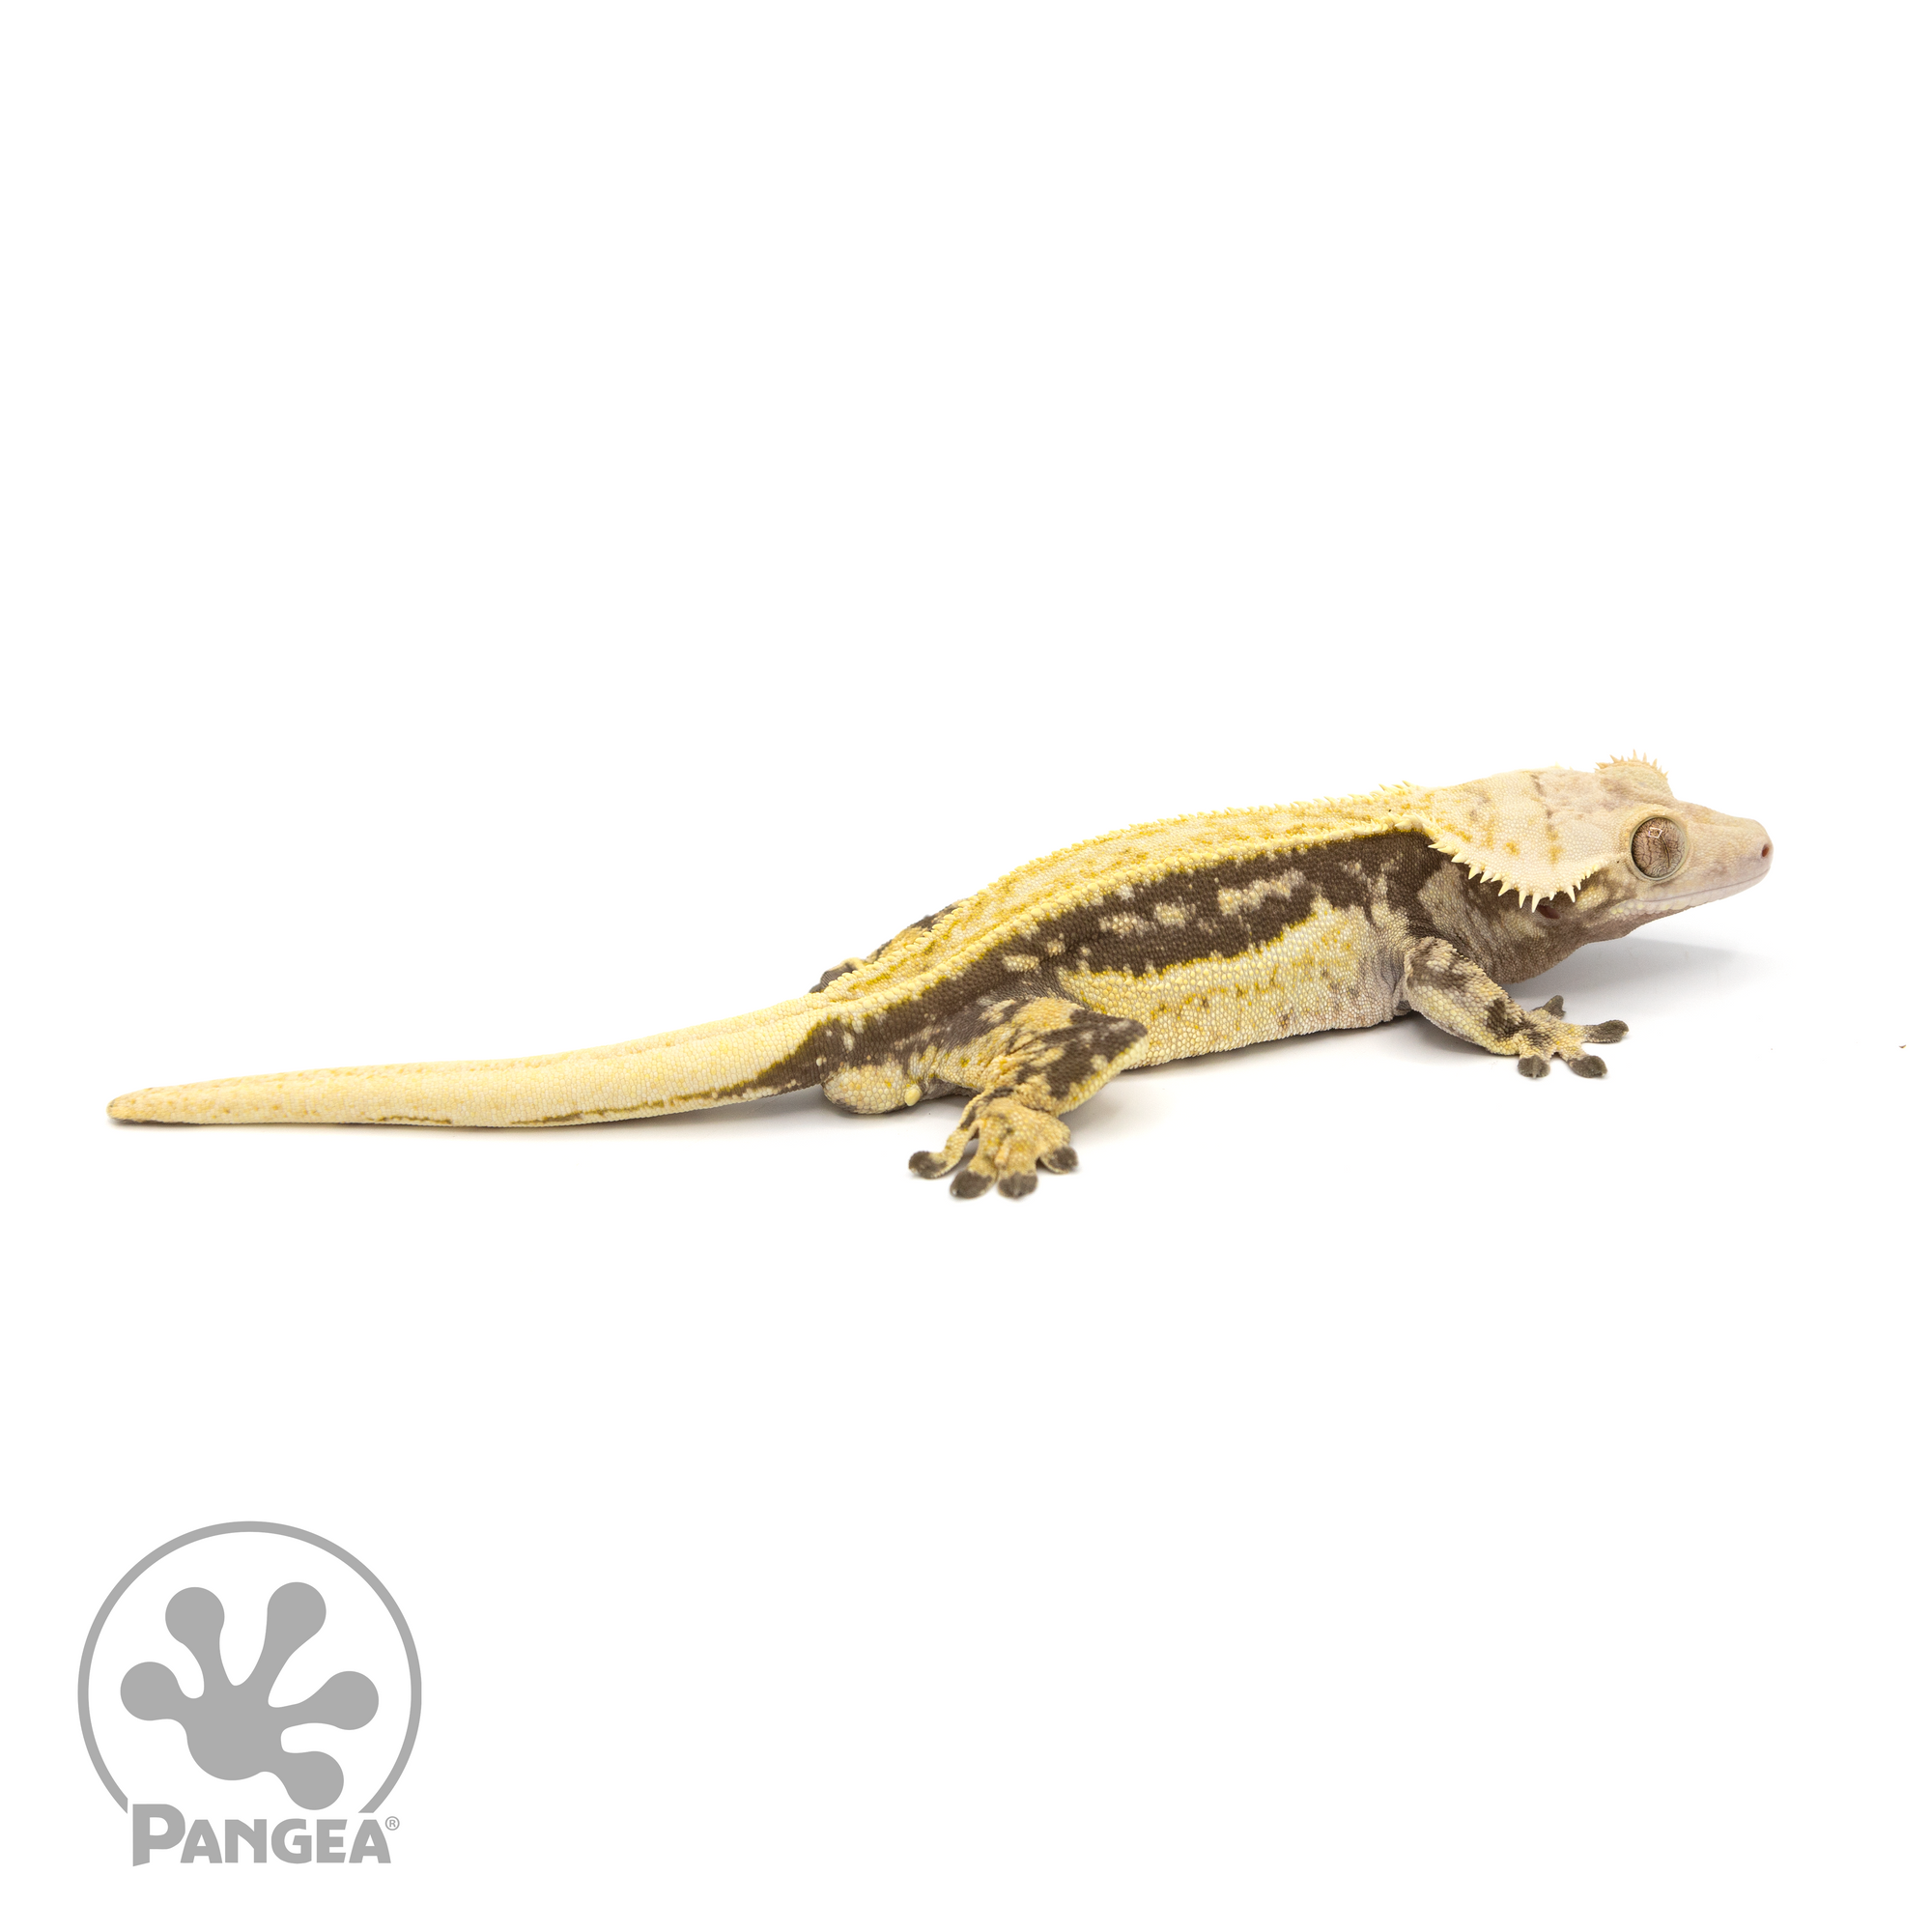 Male Quadstripe Crested Gecko Cr-1230 looking right